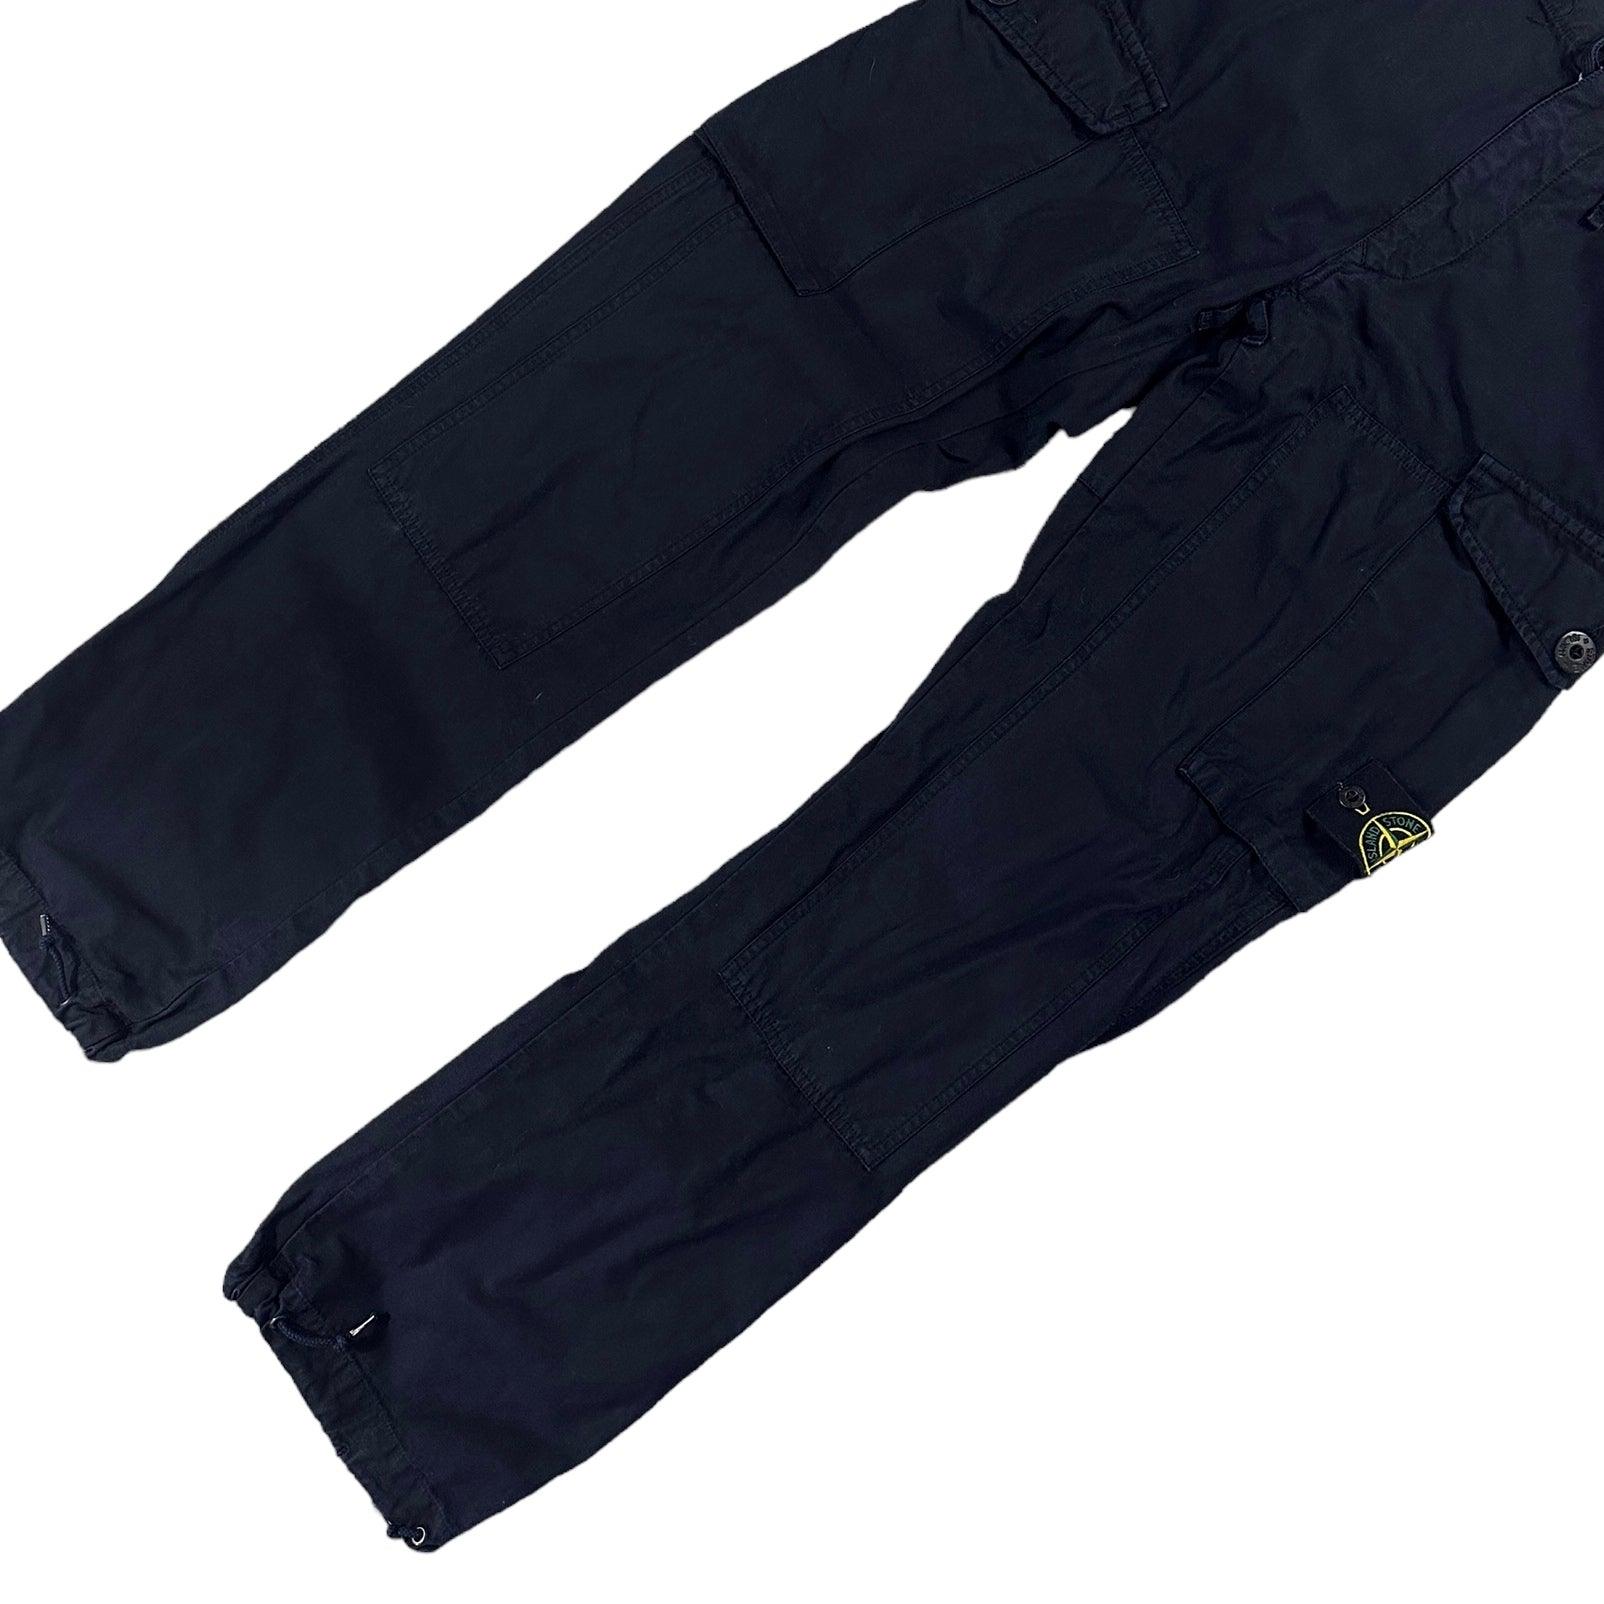 Stone Island Straight Leg Cargo Trousers from late 2000’s - Known Source